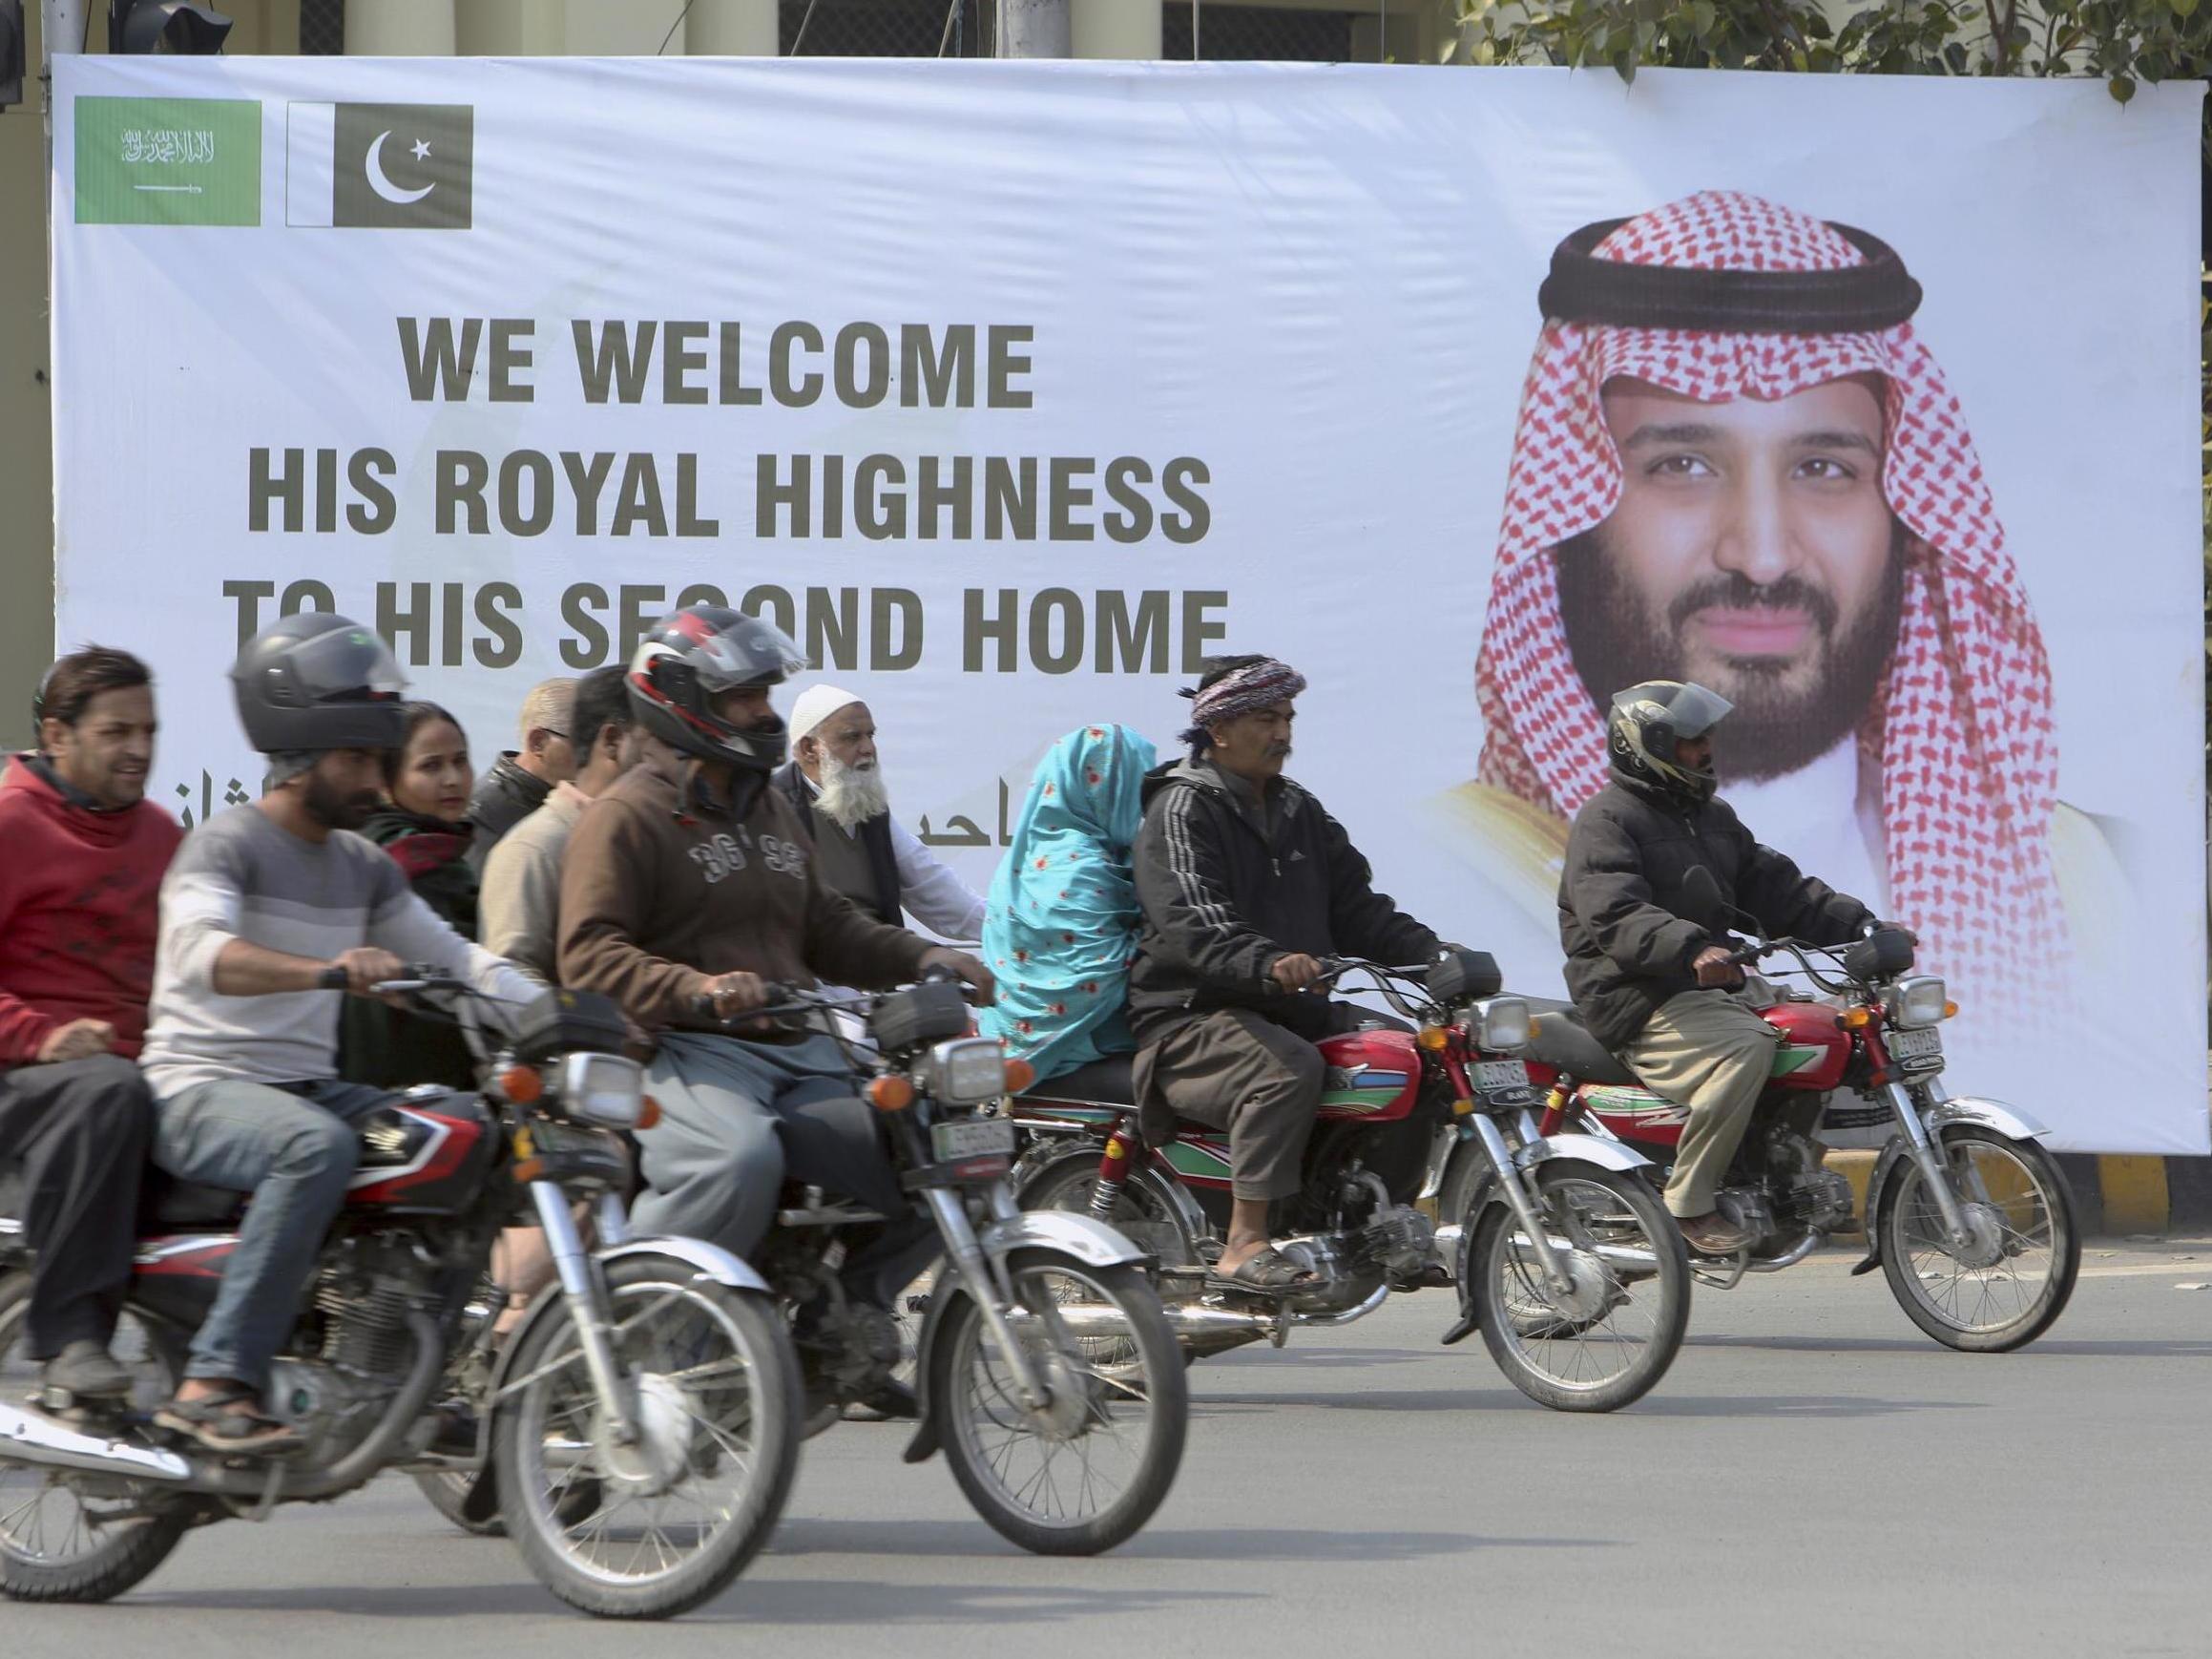 Pakistani motorcyclists pass by a banner welcoming Saudi Arabia's Crown Prince Mohammed bin Salman, displayed on the occasion of his visit in Lahore, Pakistan, on Saturday 16 February 2019.